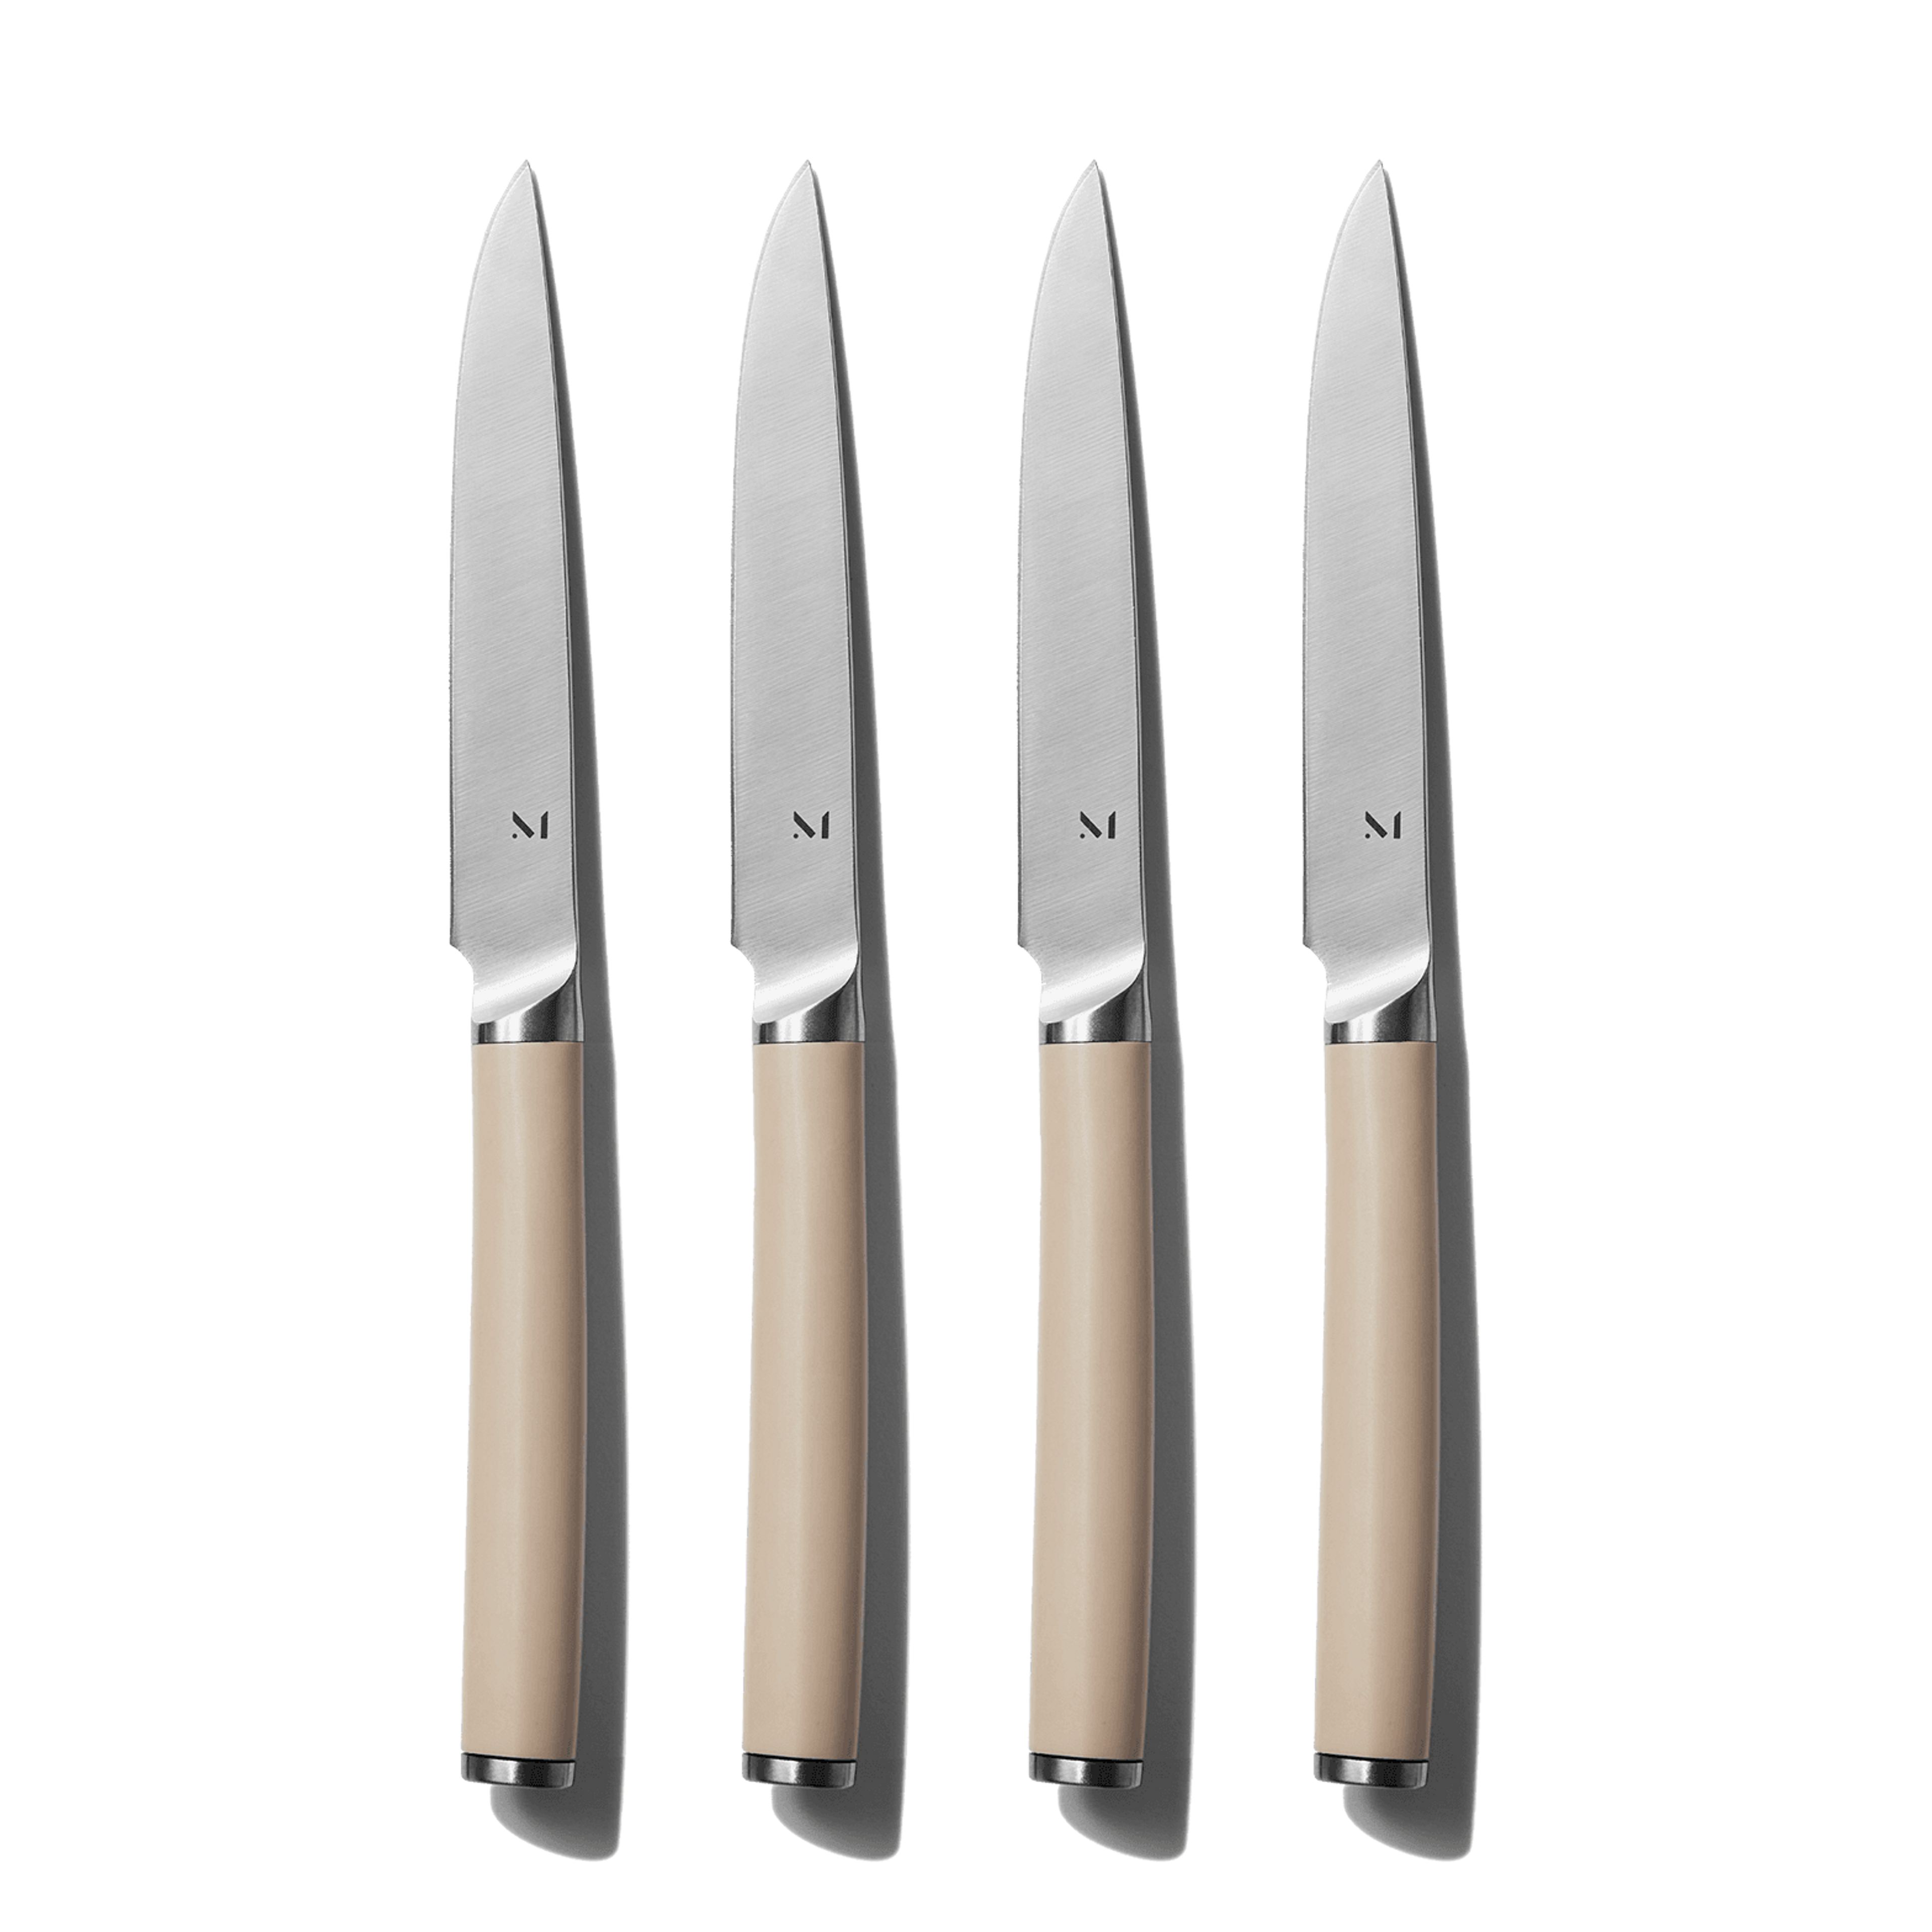 The Table Knives